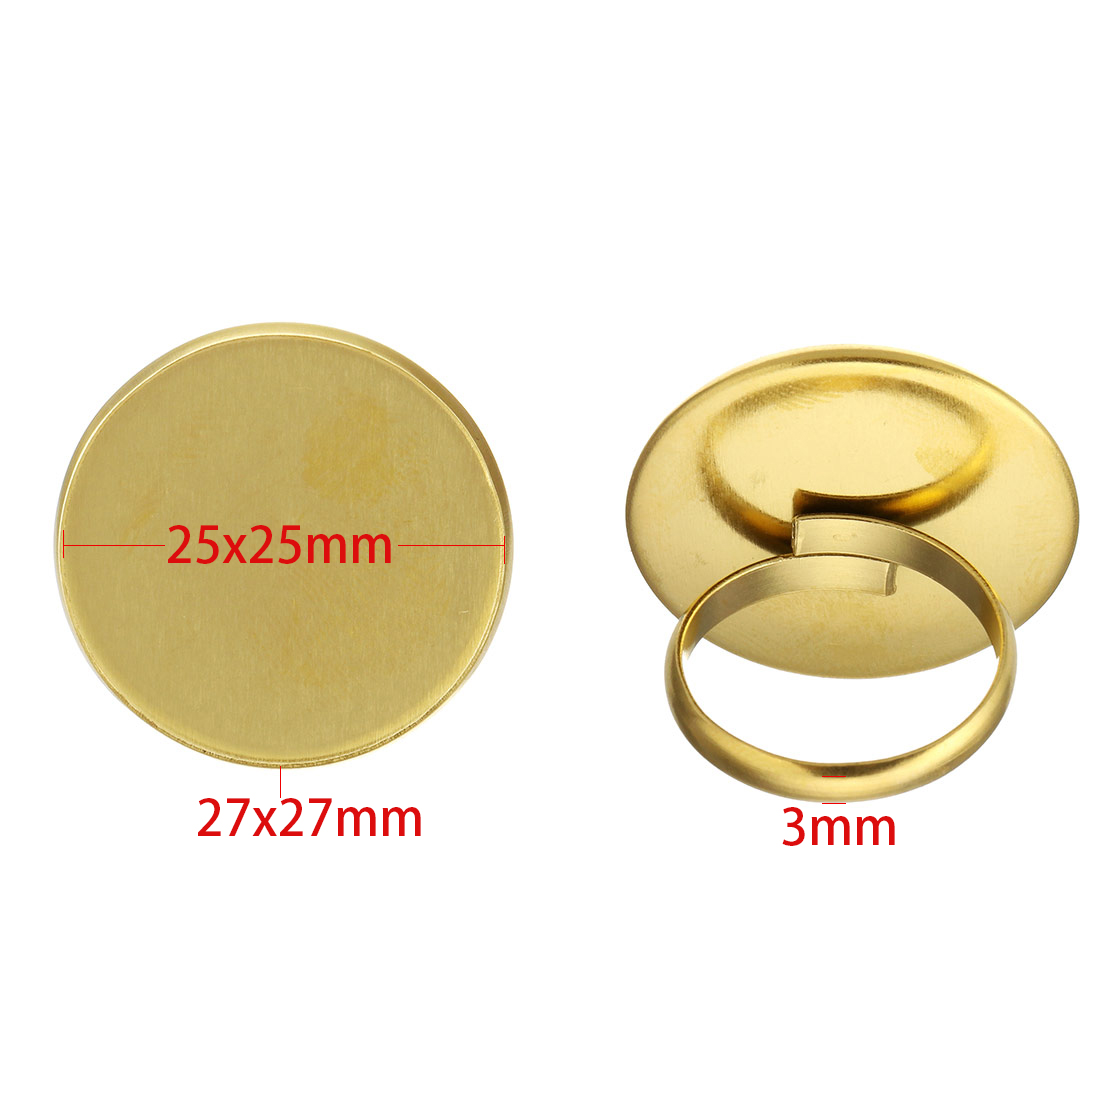 1:gold 27*27mm